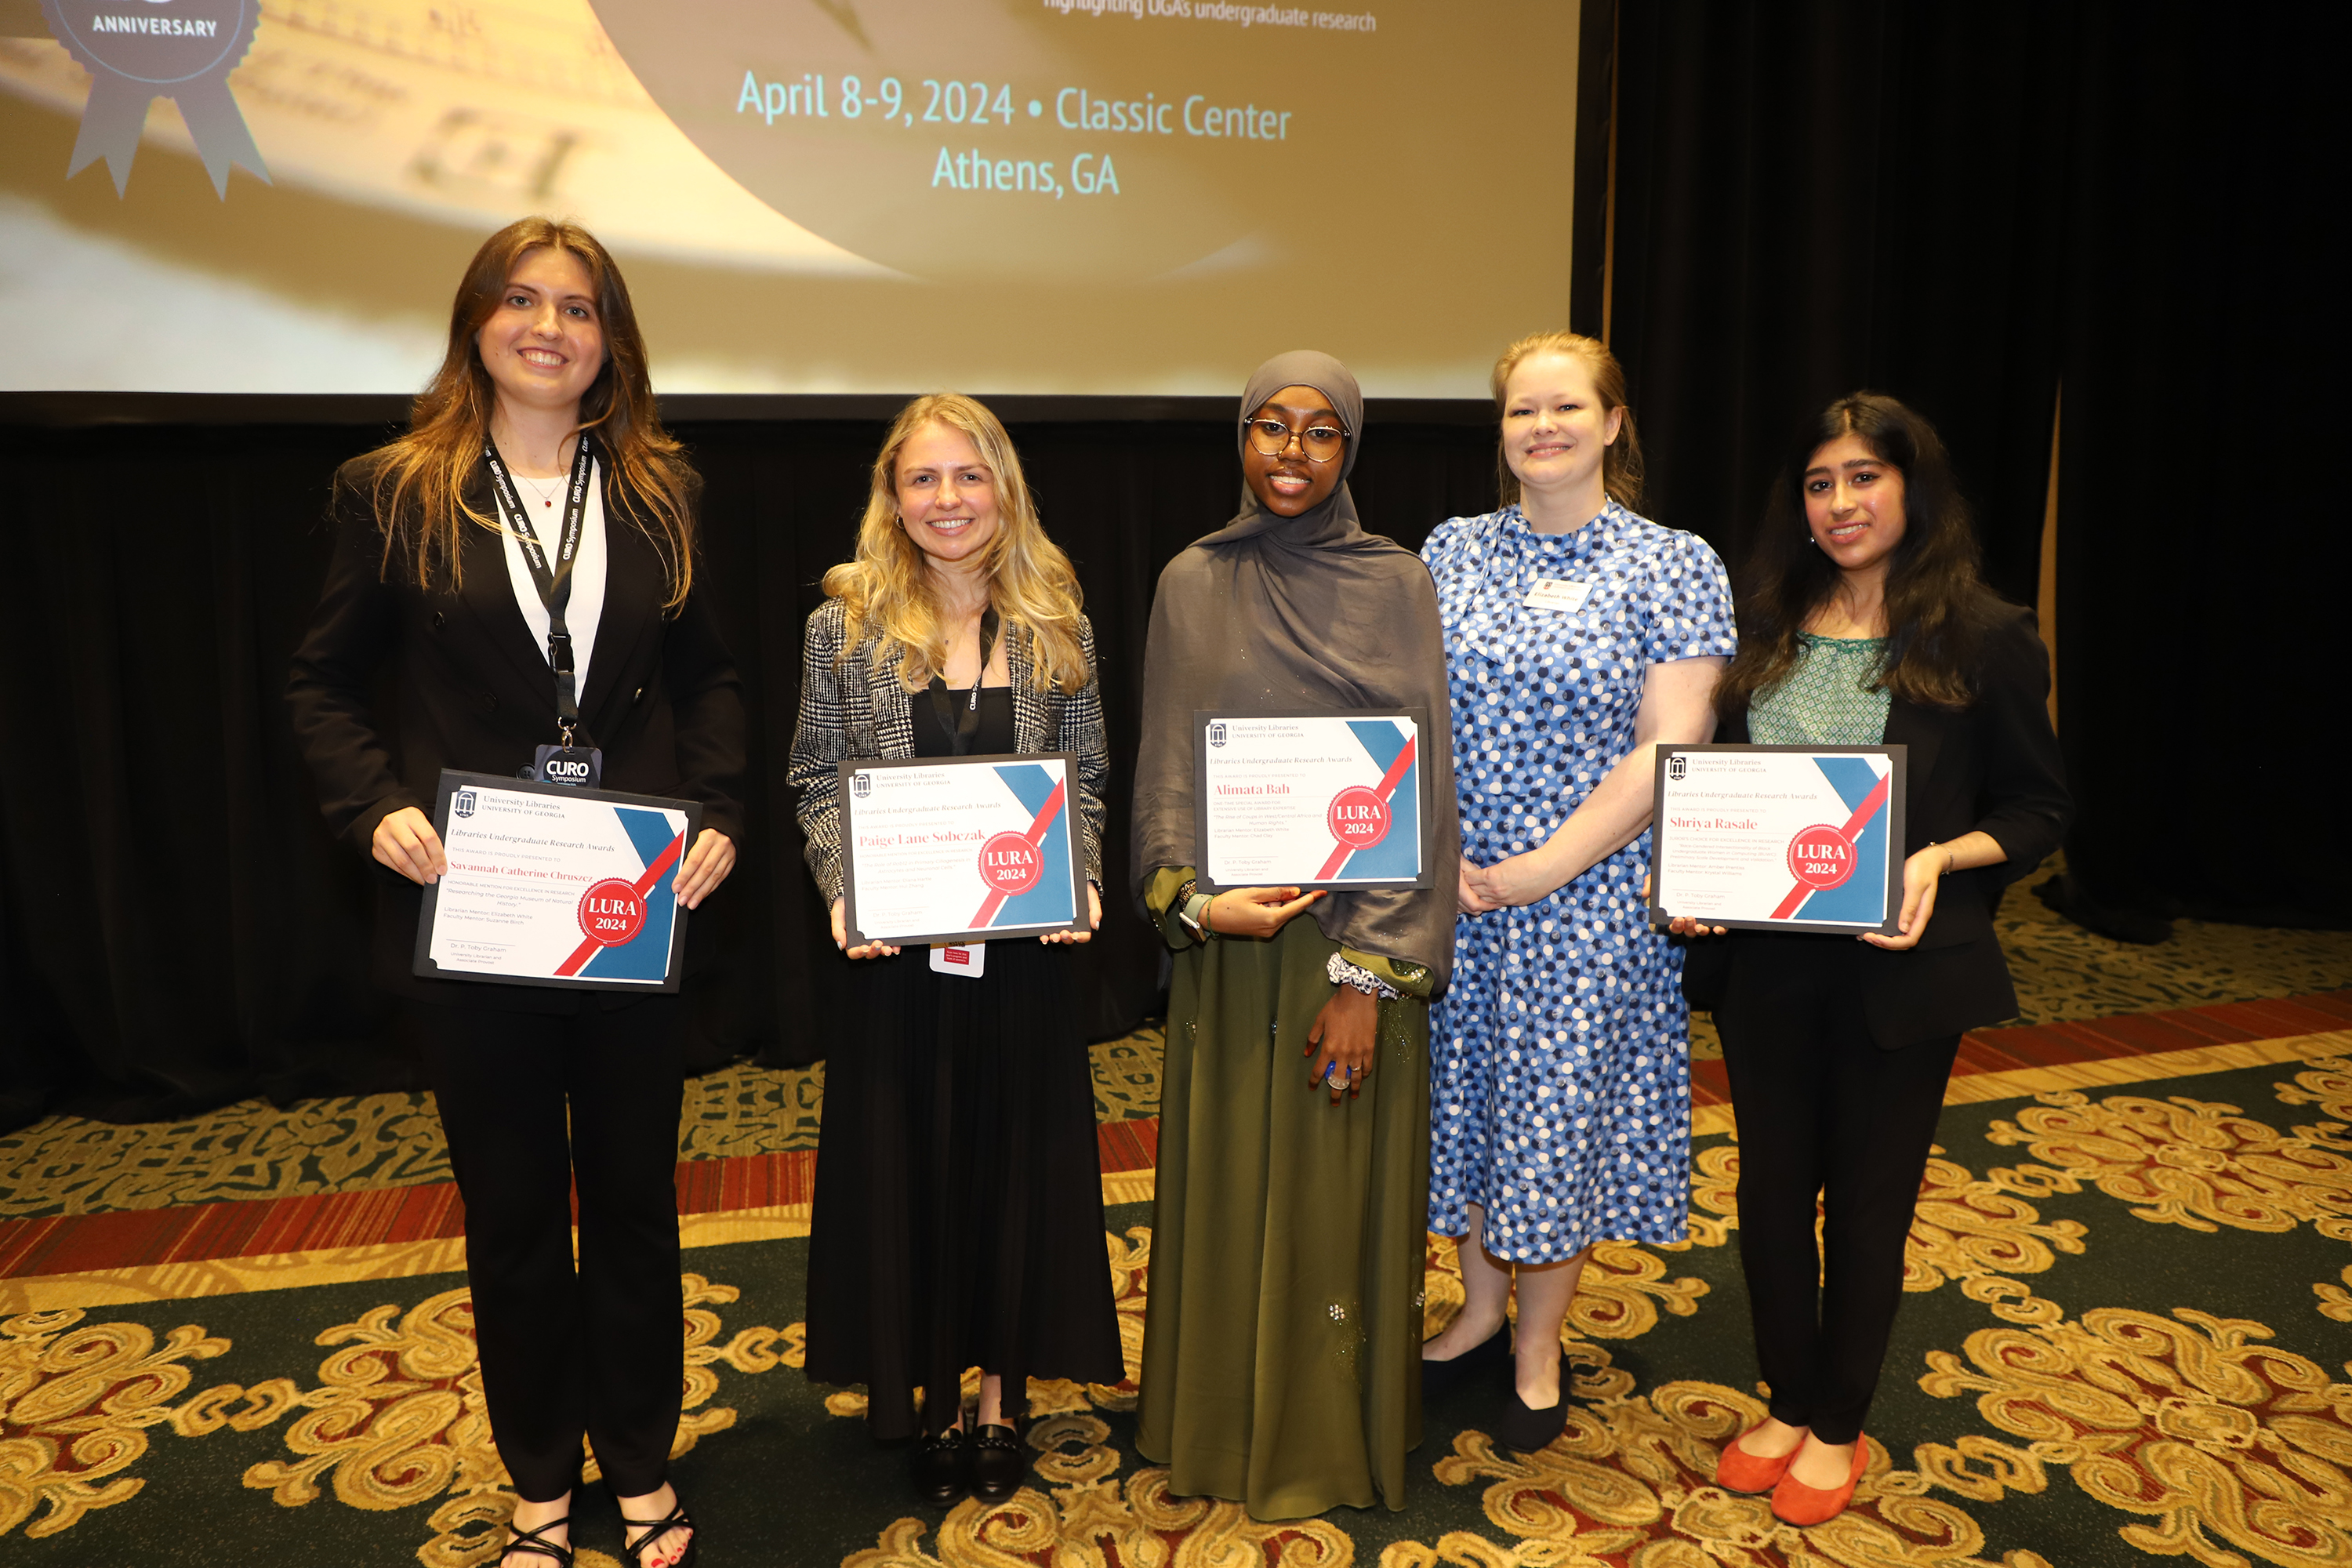 Winners of the Libraries Undergraduate Research Award. Pictured left to right are  Savannah Chruszcz, Paige Sobczak, Alimata Bah, Shriya Rasale   Hannah Bowen and Sara Logsdon not pictured.